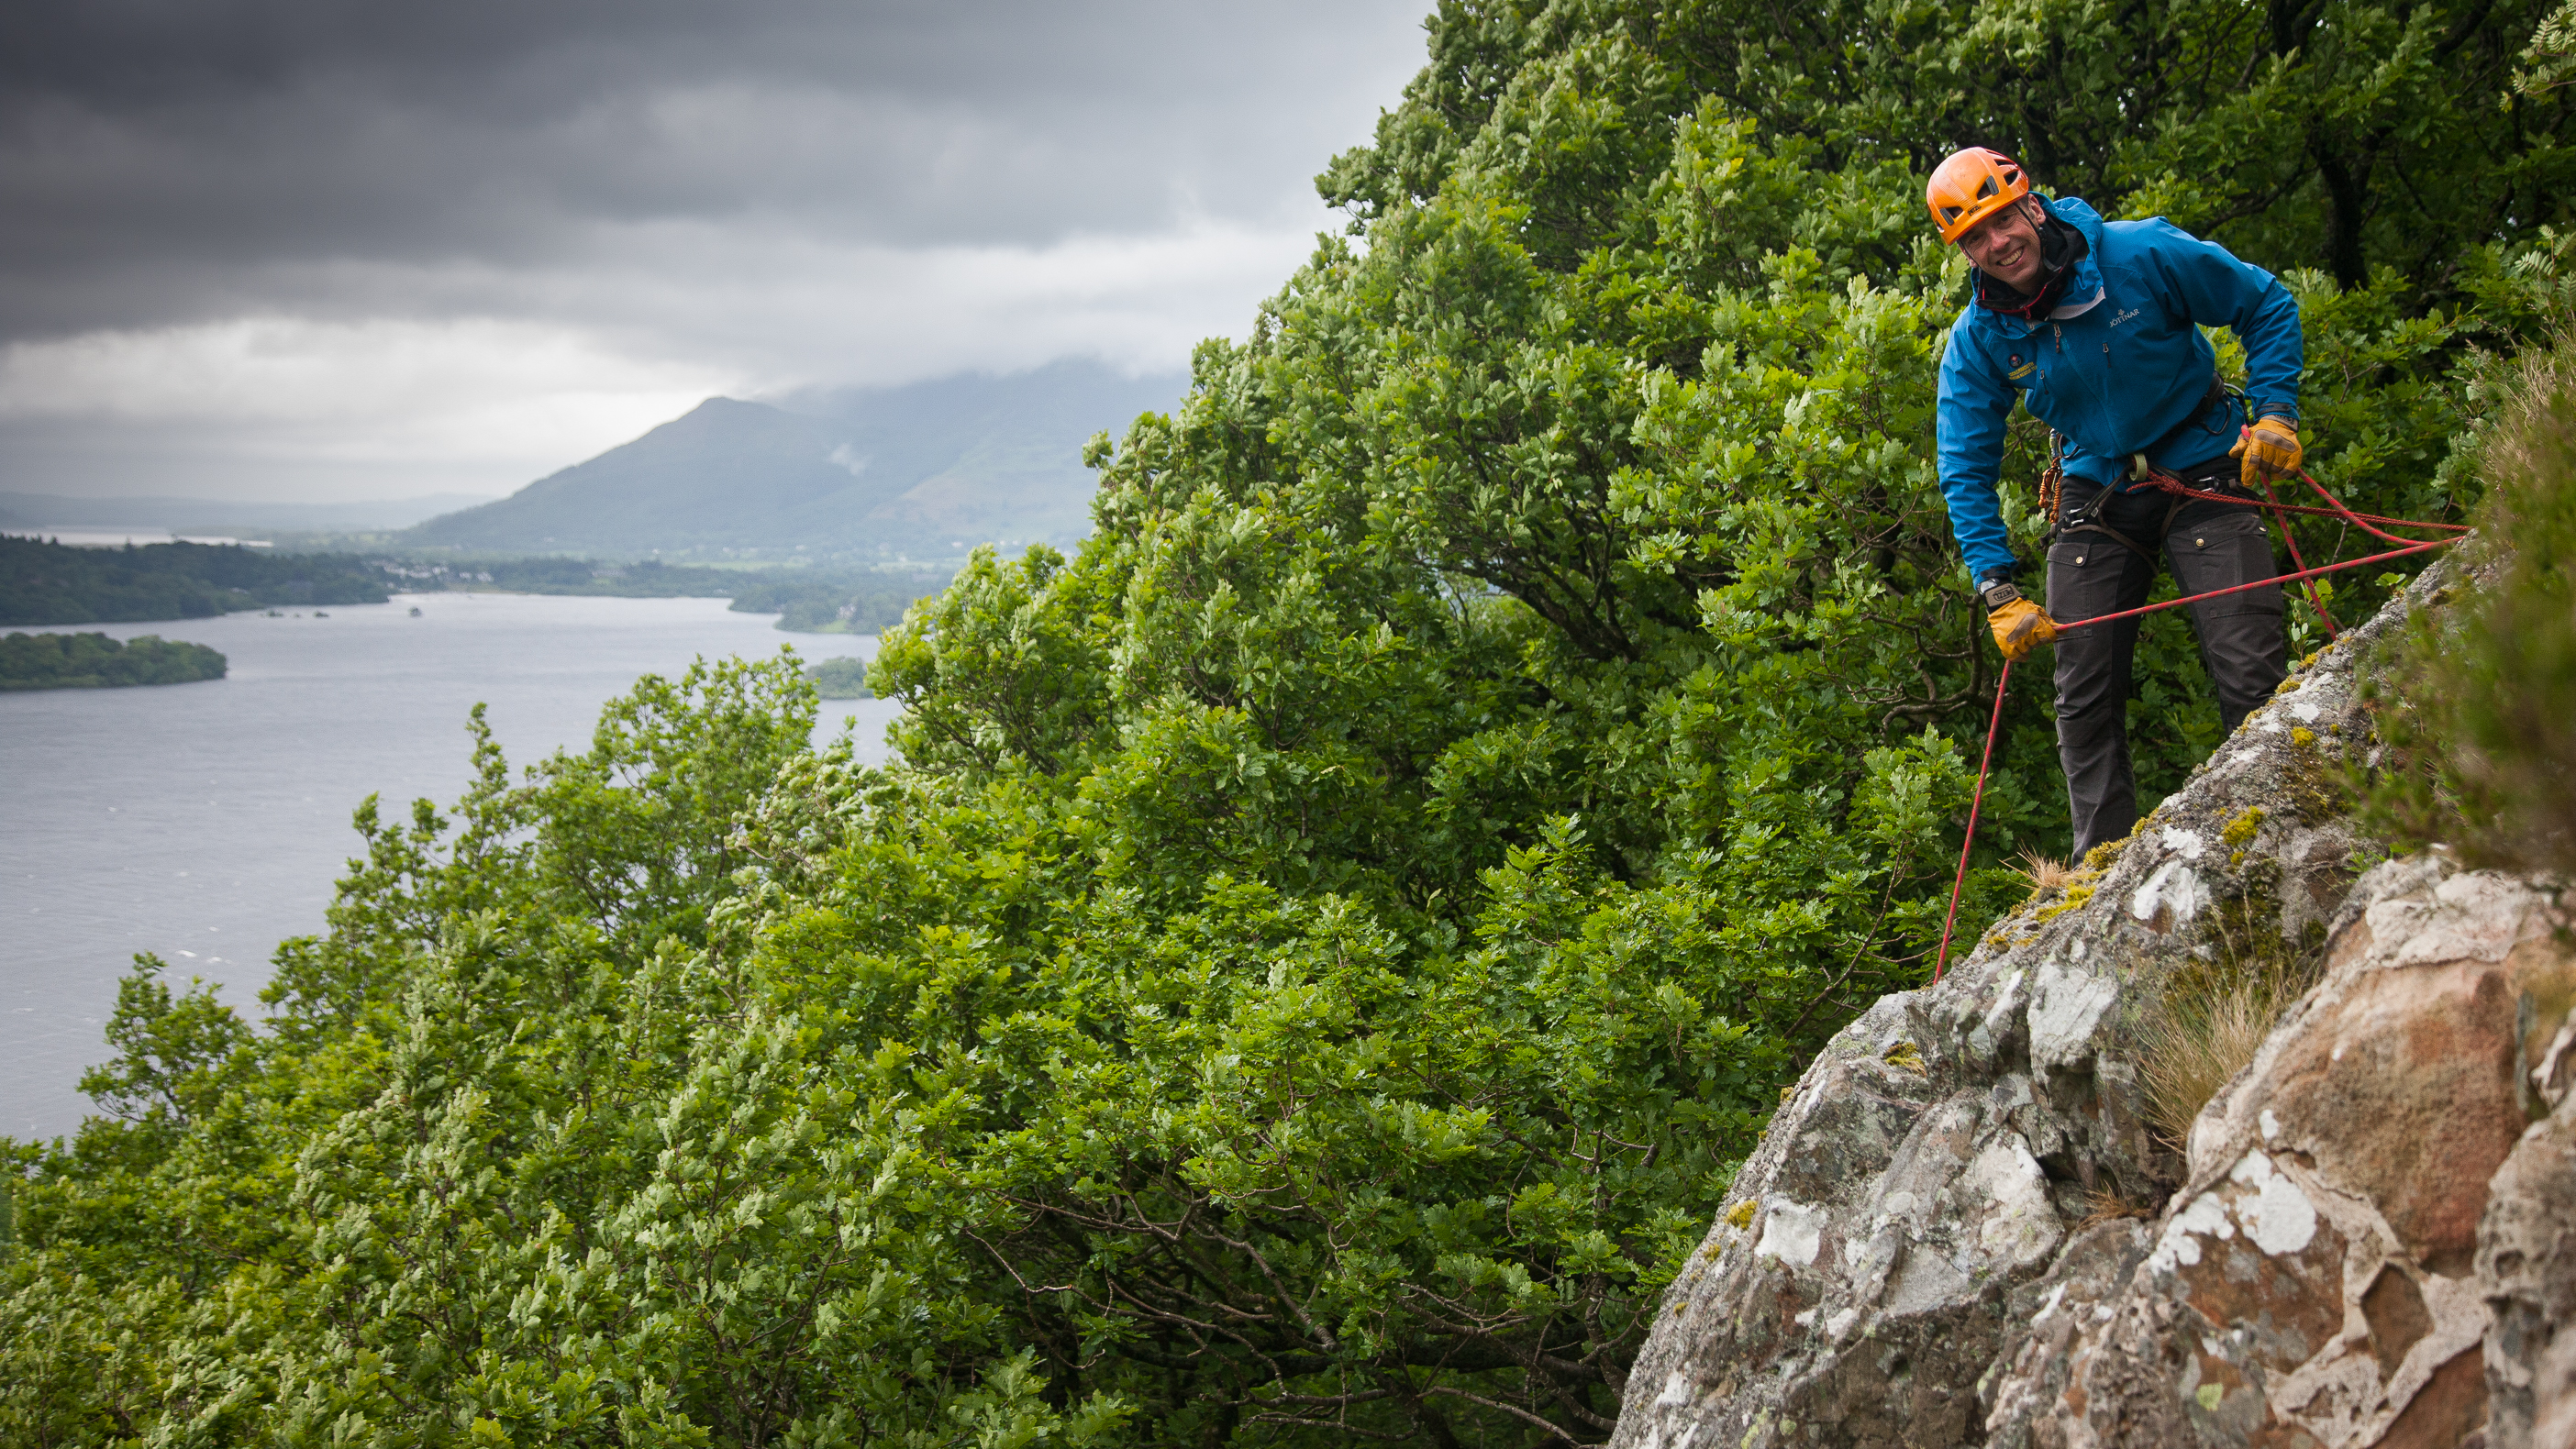 Neale managing an abseil session on a steep cliff above Derwent Water